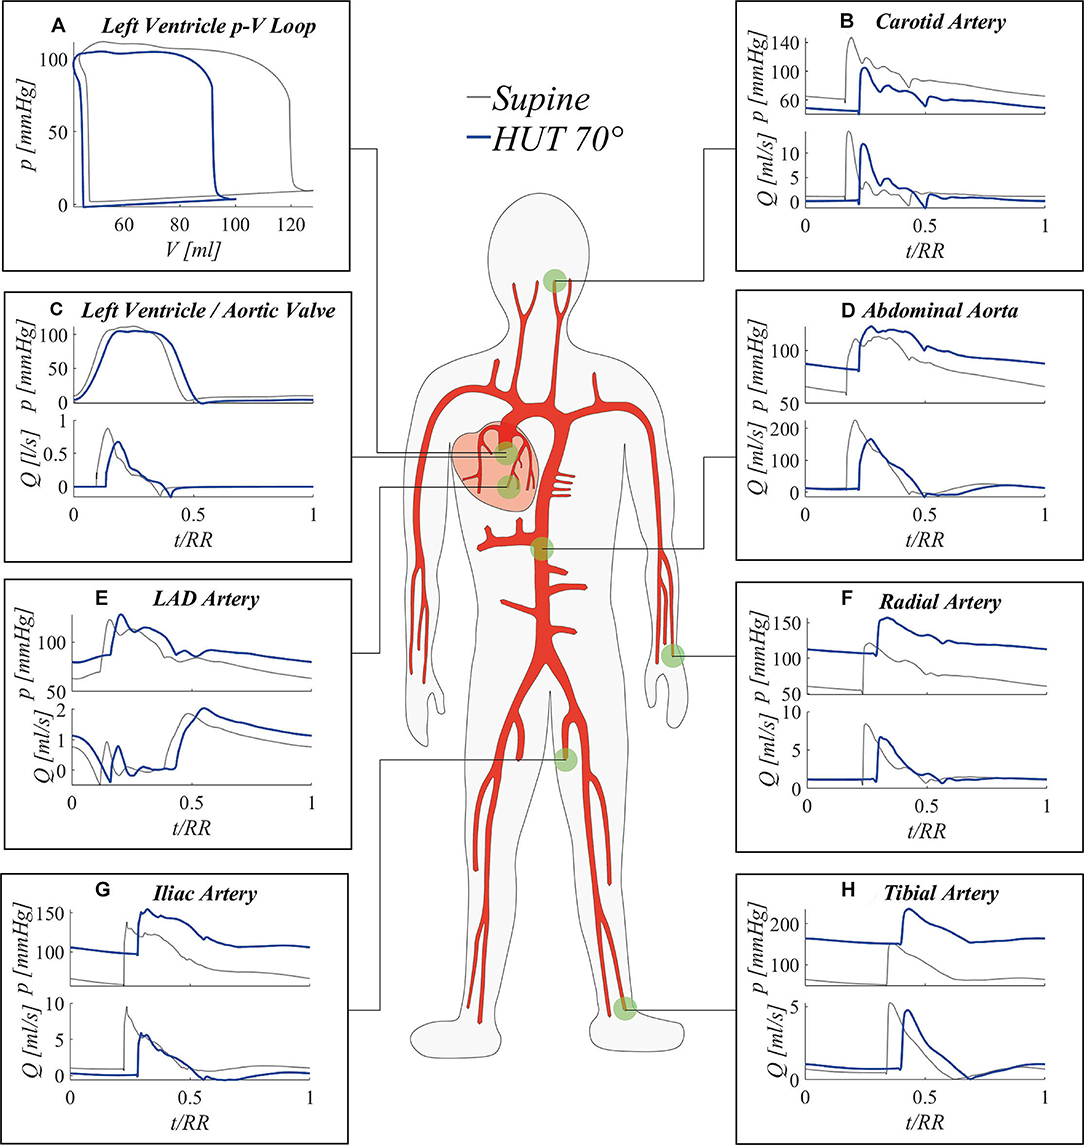 Cardiovascular responses to leg muscle loading during head-down